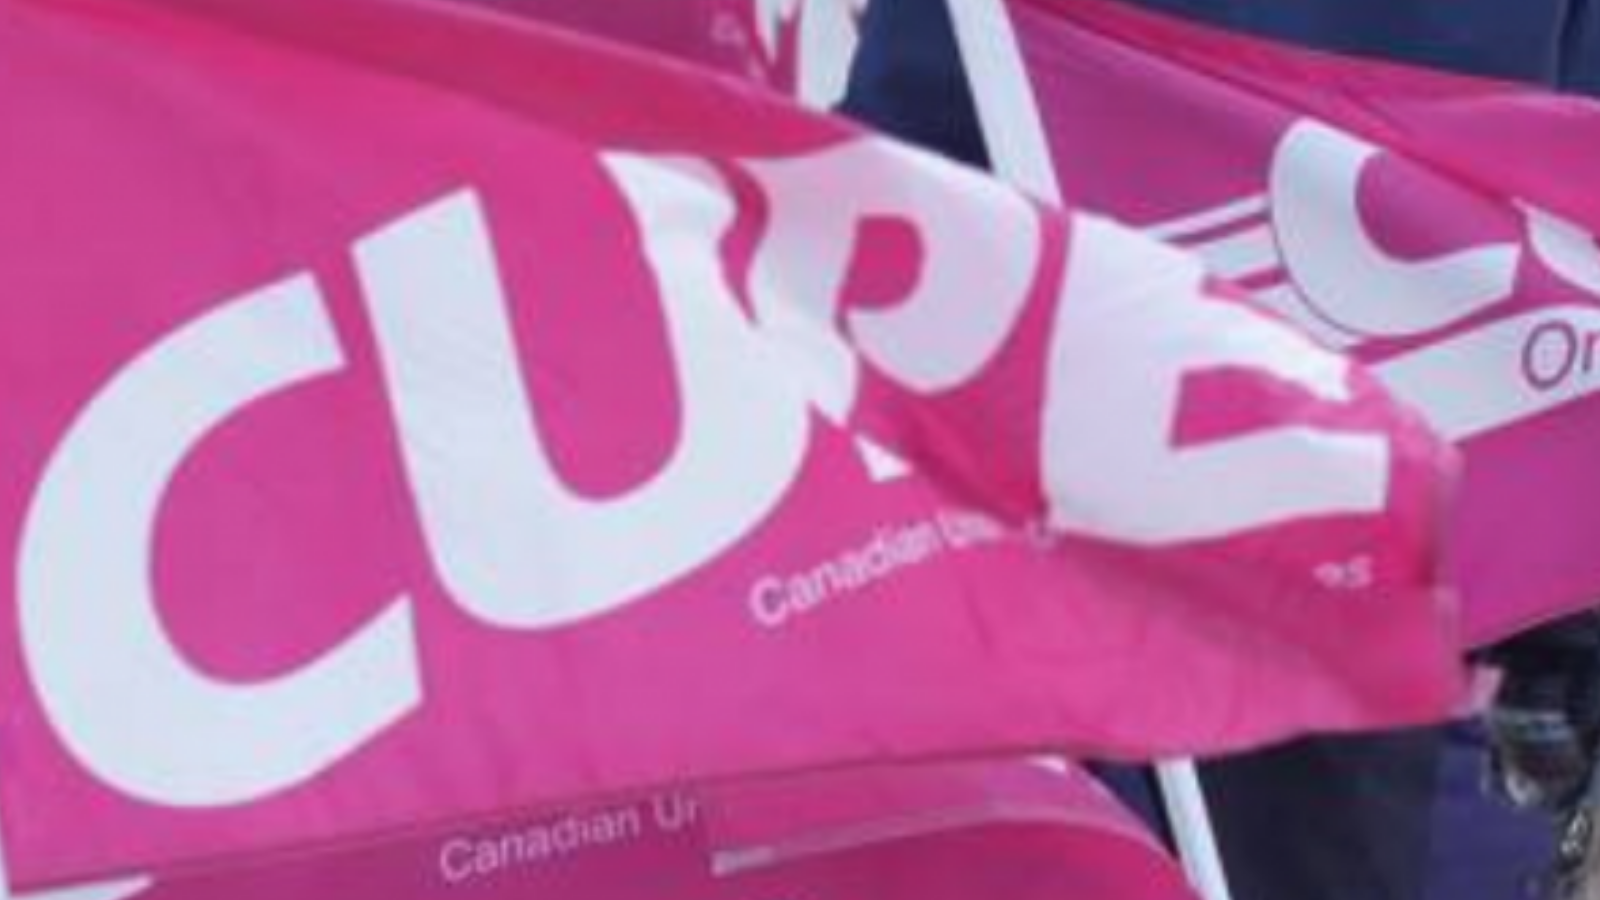 CUPE flags, pink and white